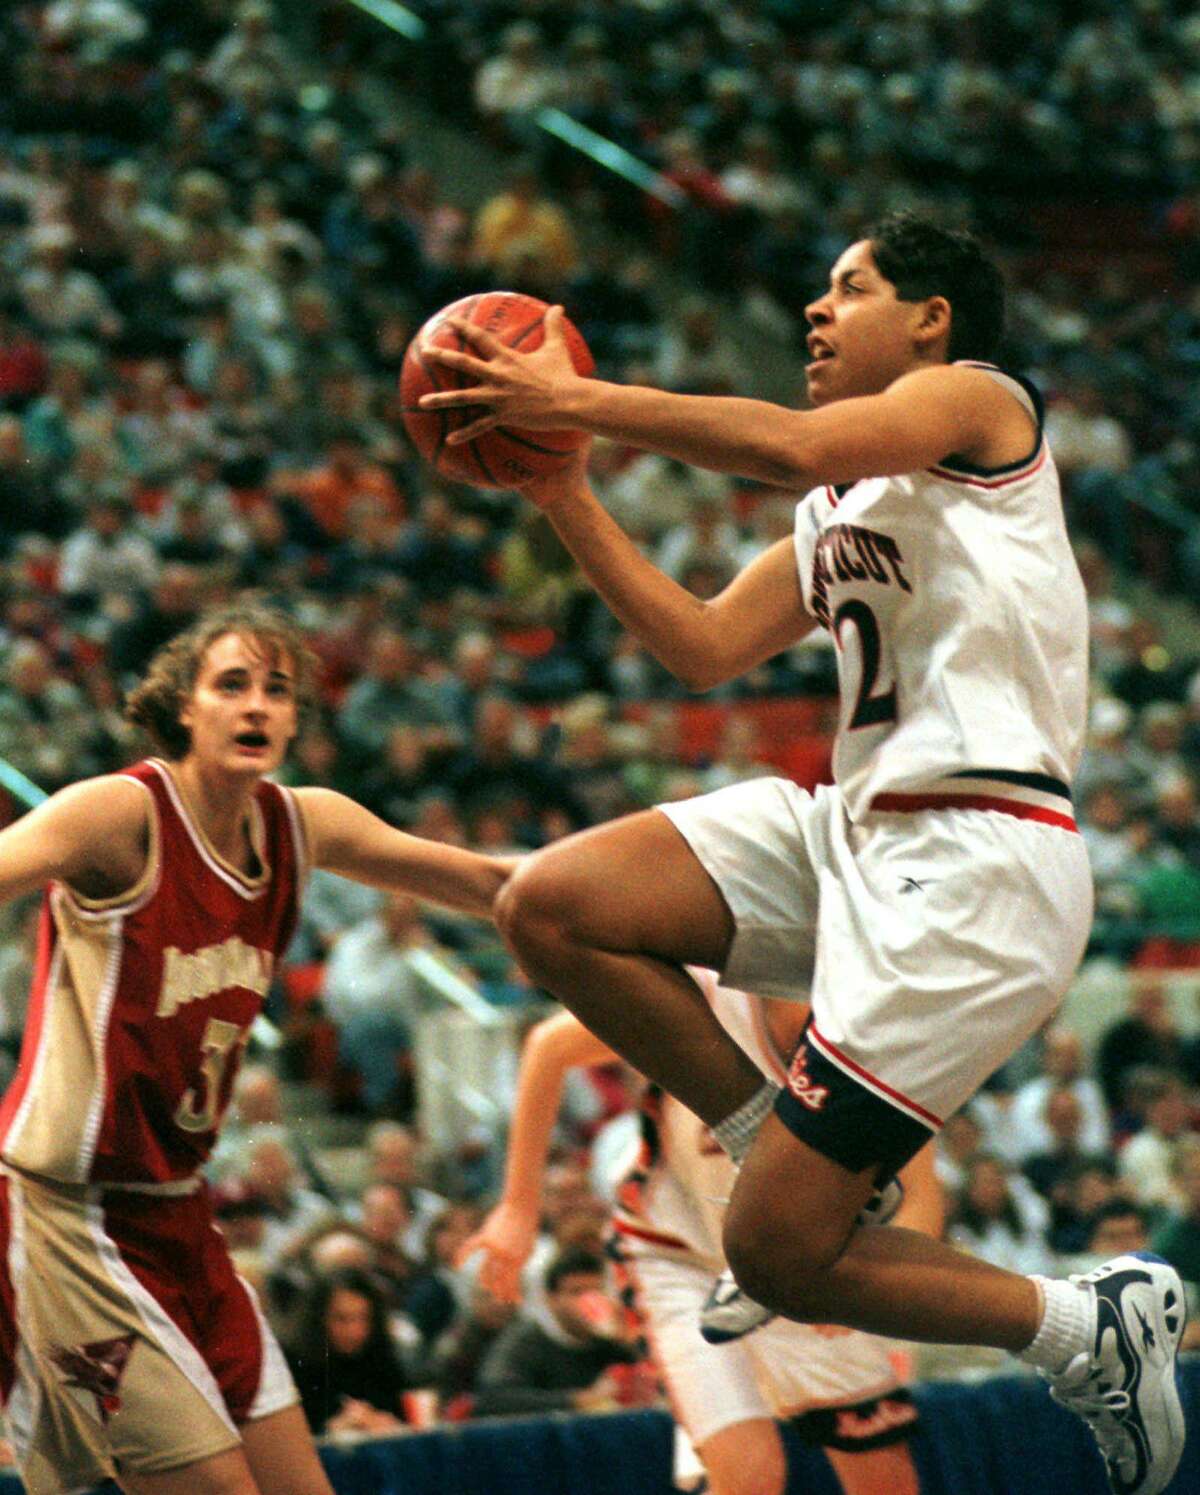 UConn’s Nykesha Sales goes up in for a shot against Boston College in 1998 in Hartford.